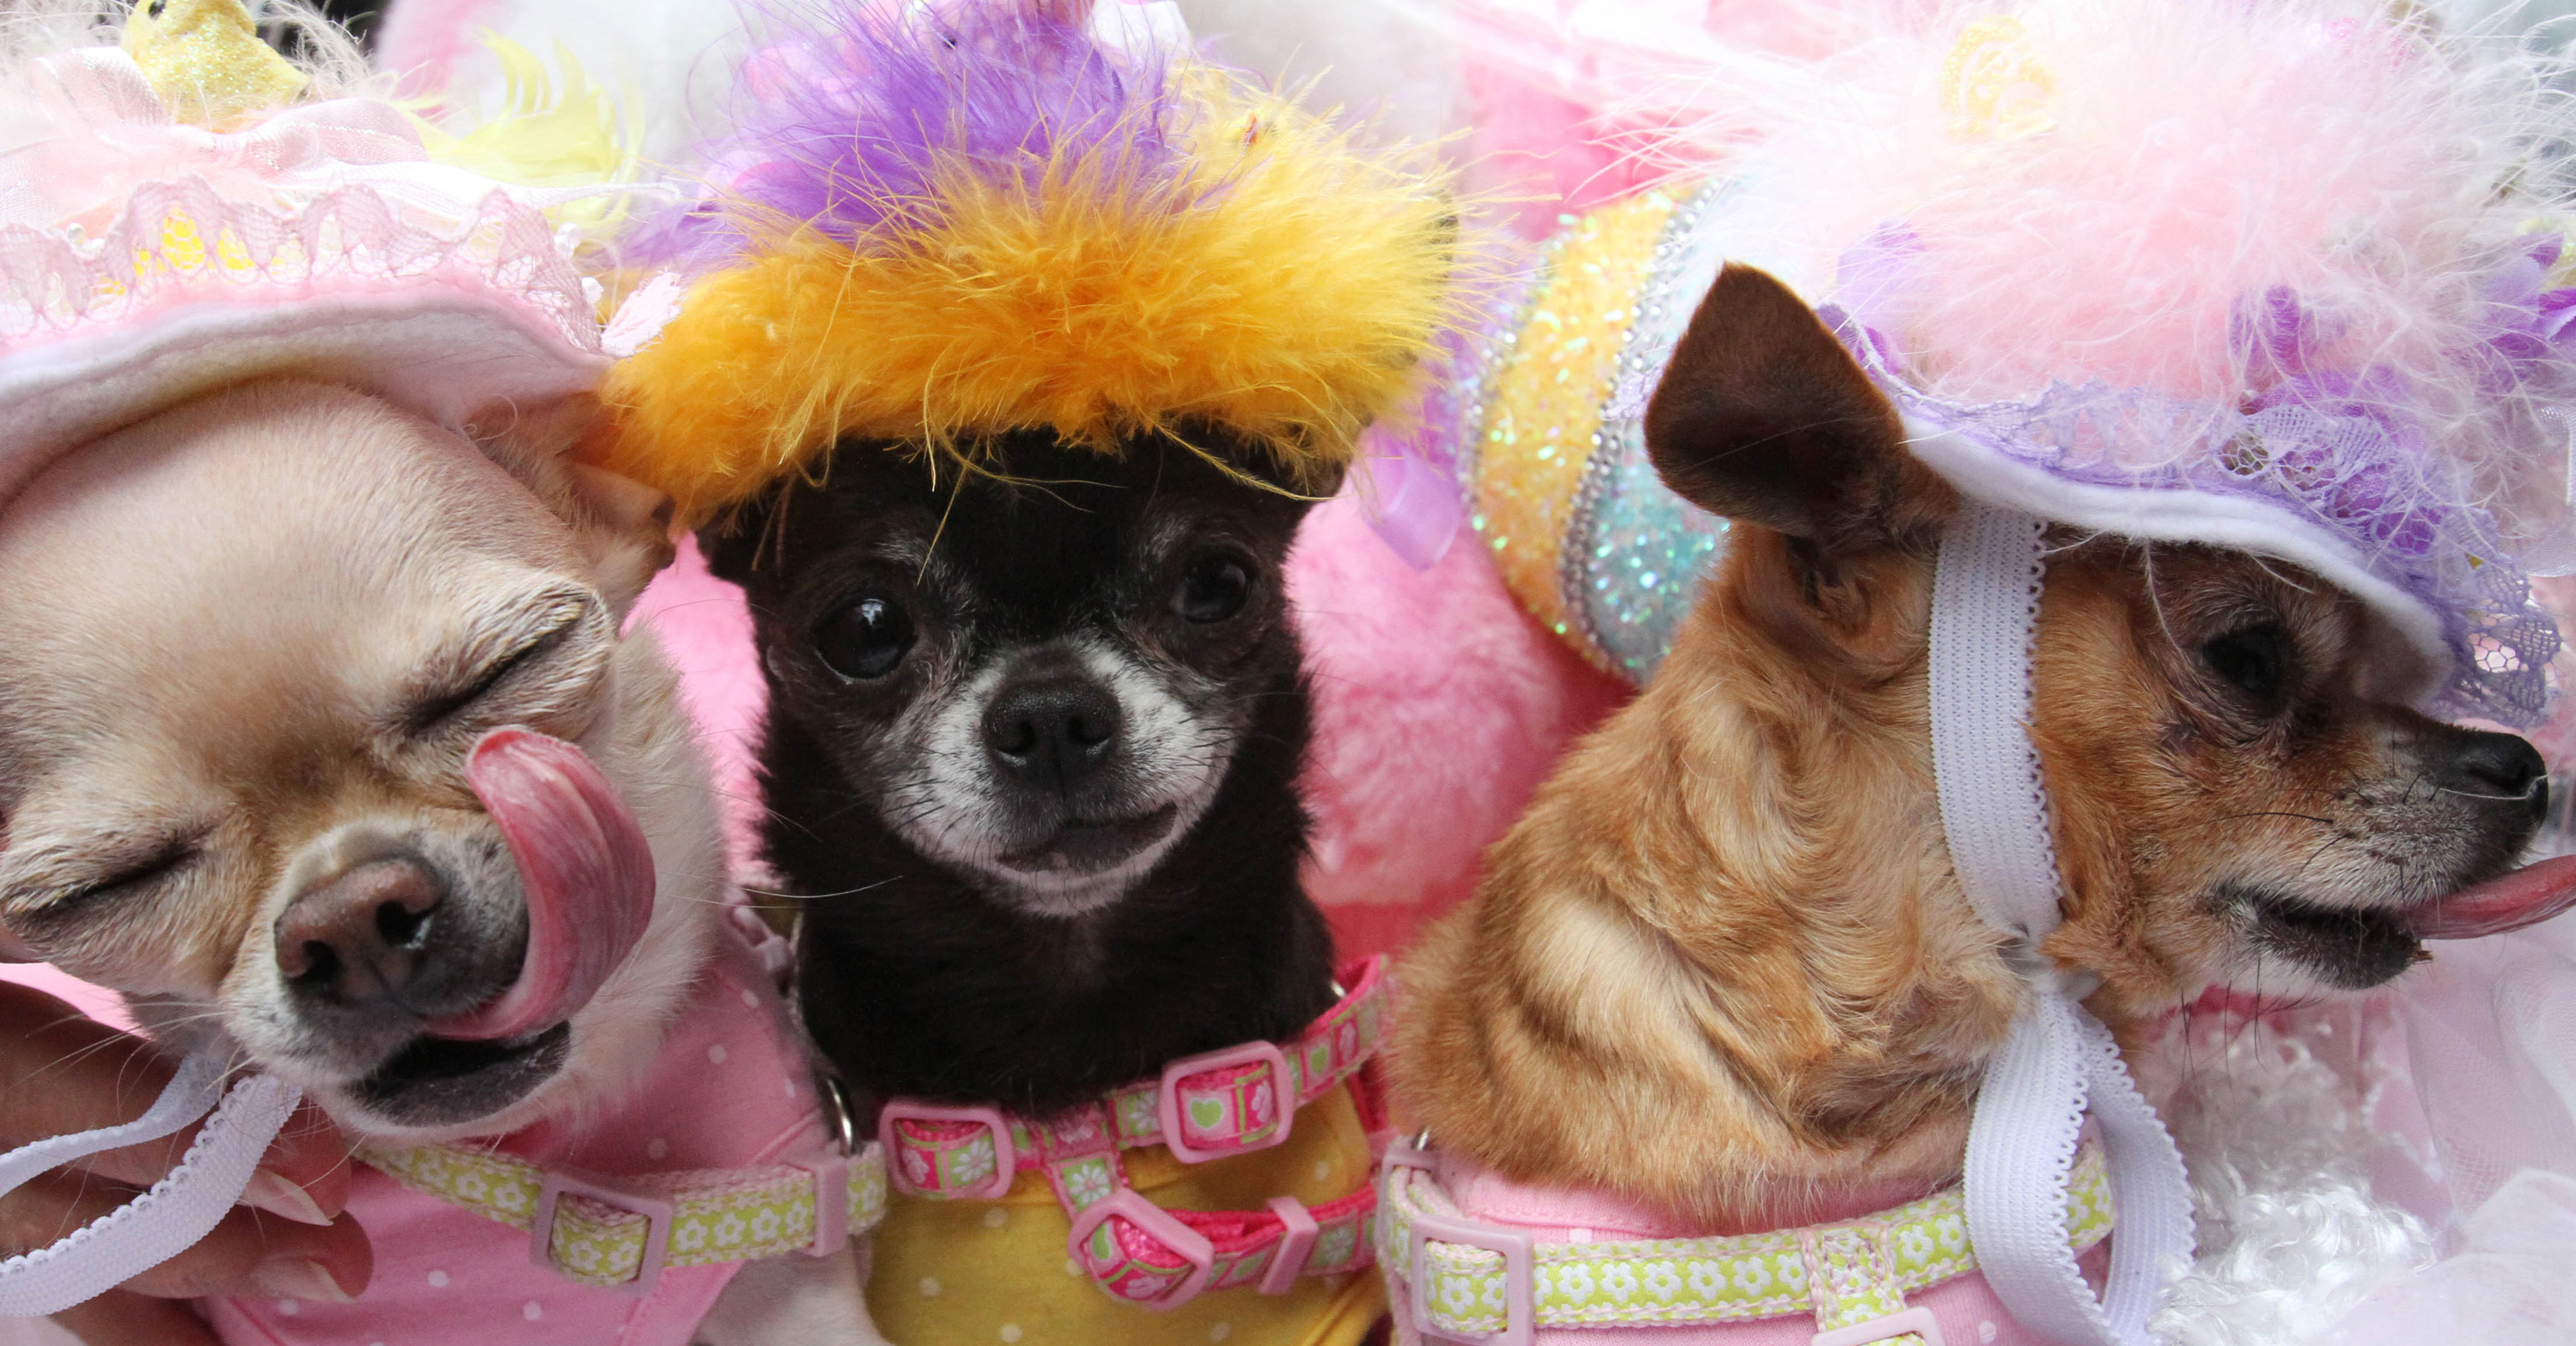 Chihuahua's Yum Yum, left, Gumdrop, center, and Lollipop take part in the Easter Parade along New York's Fifth Avenue on Sunday, April 5, 2015. The 2015 Easter Parade bore little resemblance to the first one, which started in the 1880s as a strolling display of what prosperous New Yorkers wore to Fifth Avenue churches. In recent decades, the street gathering has morphed into a sort of costume circus — including pet dogs. (AP Photo/Tina Fineberg)